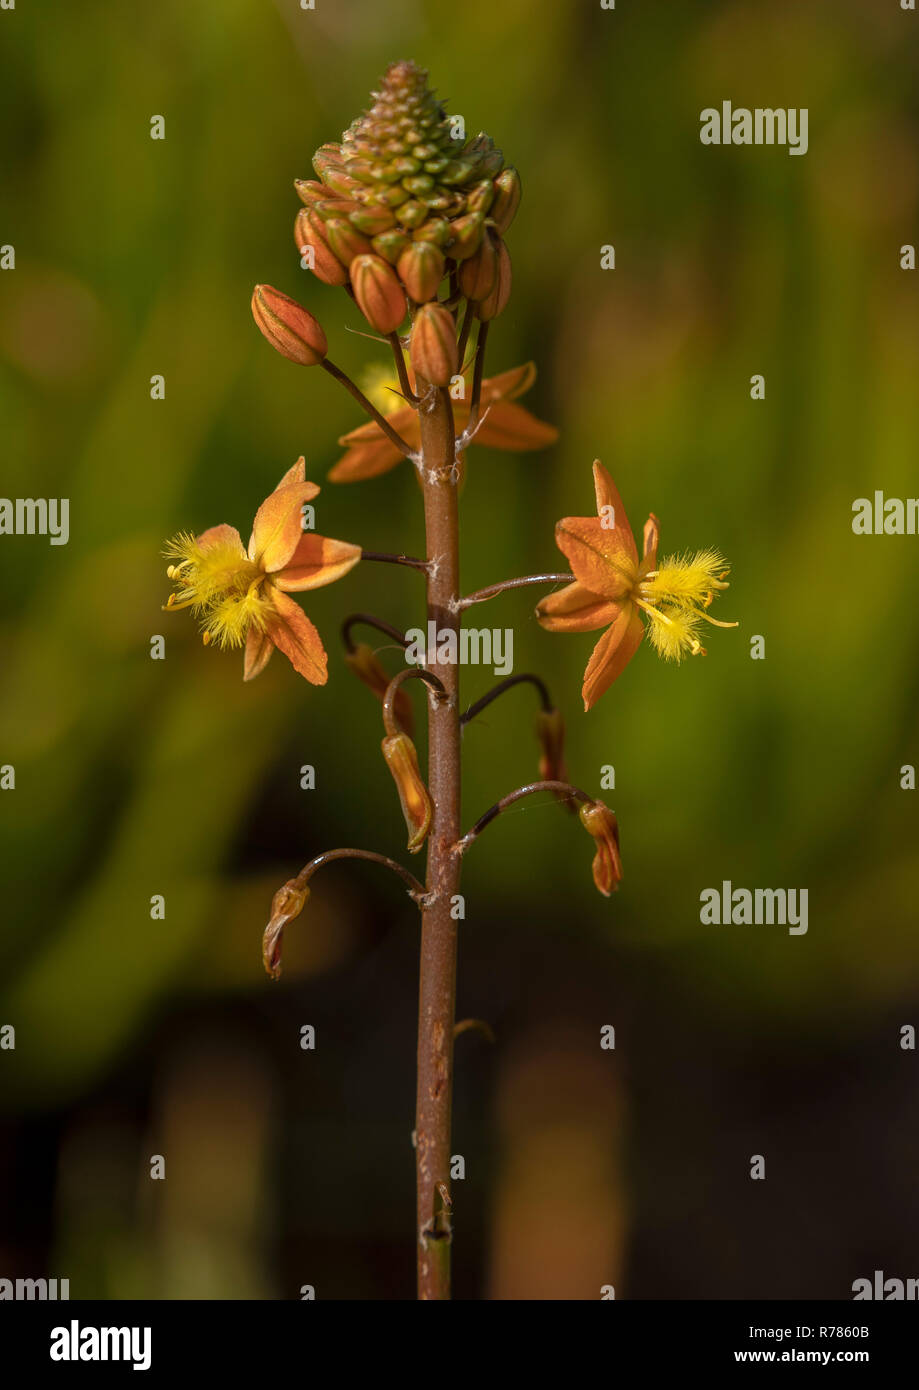 Stalked bulbine, Bulbine frutescens, in flower, South Africa Stock Photo